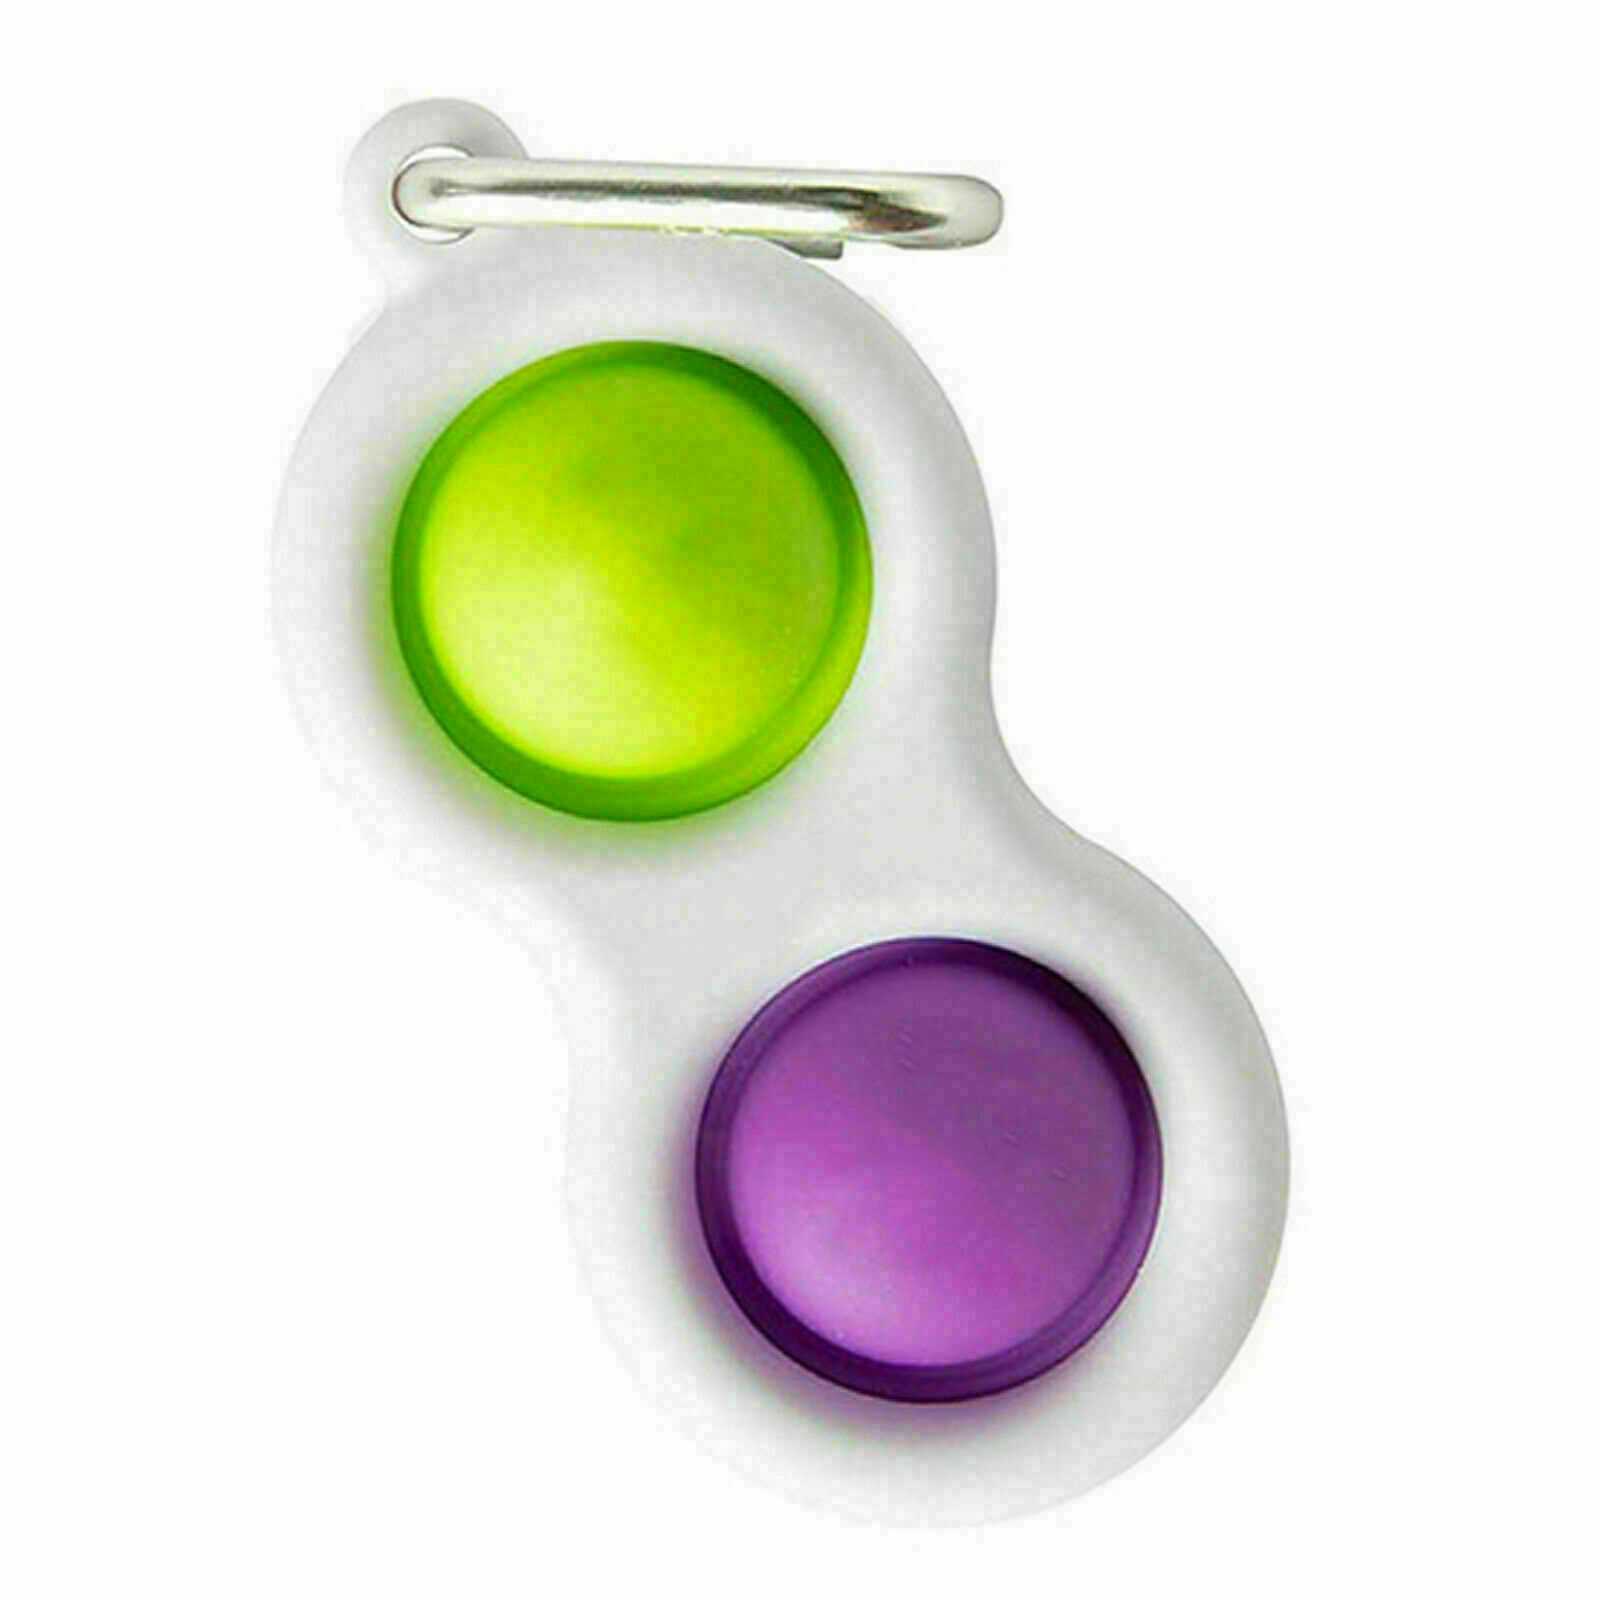 Green and Purple Kid Children Simple Dimple Special Needs Silent Sensory Fidget Keyring Toy Autism Classroom Adult